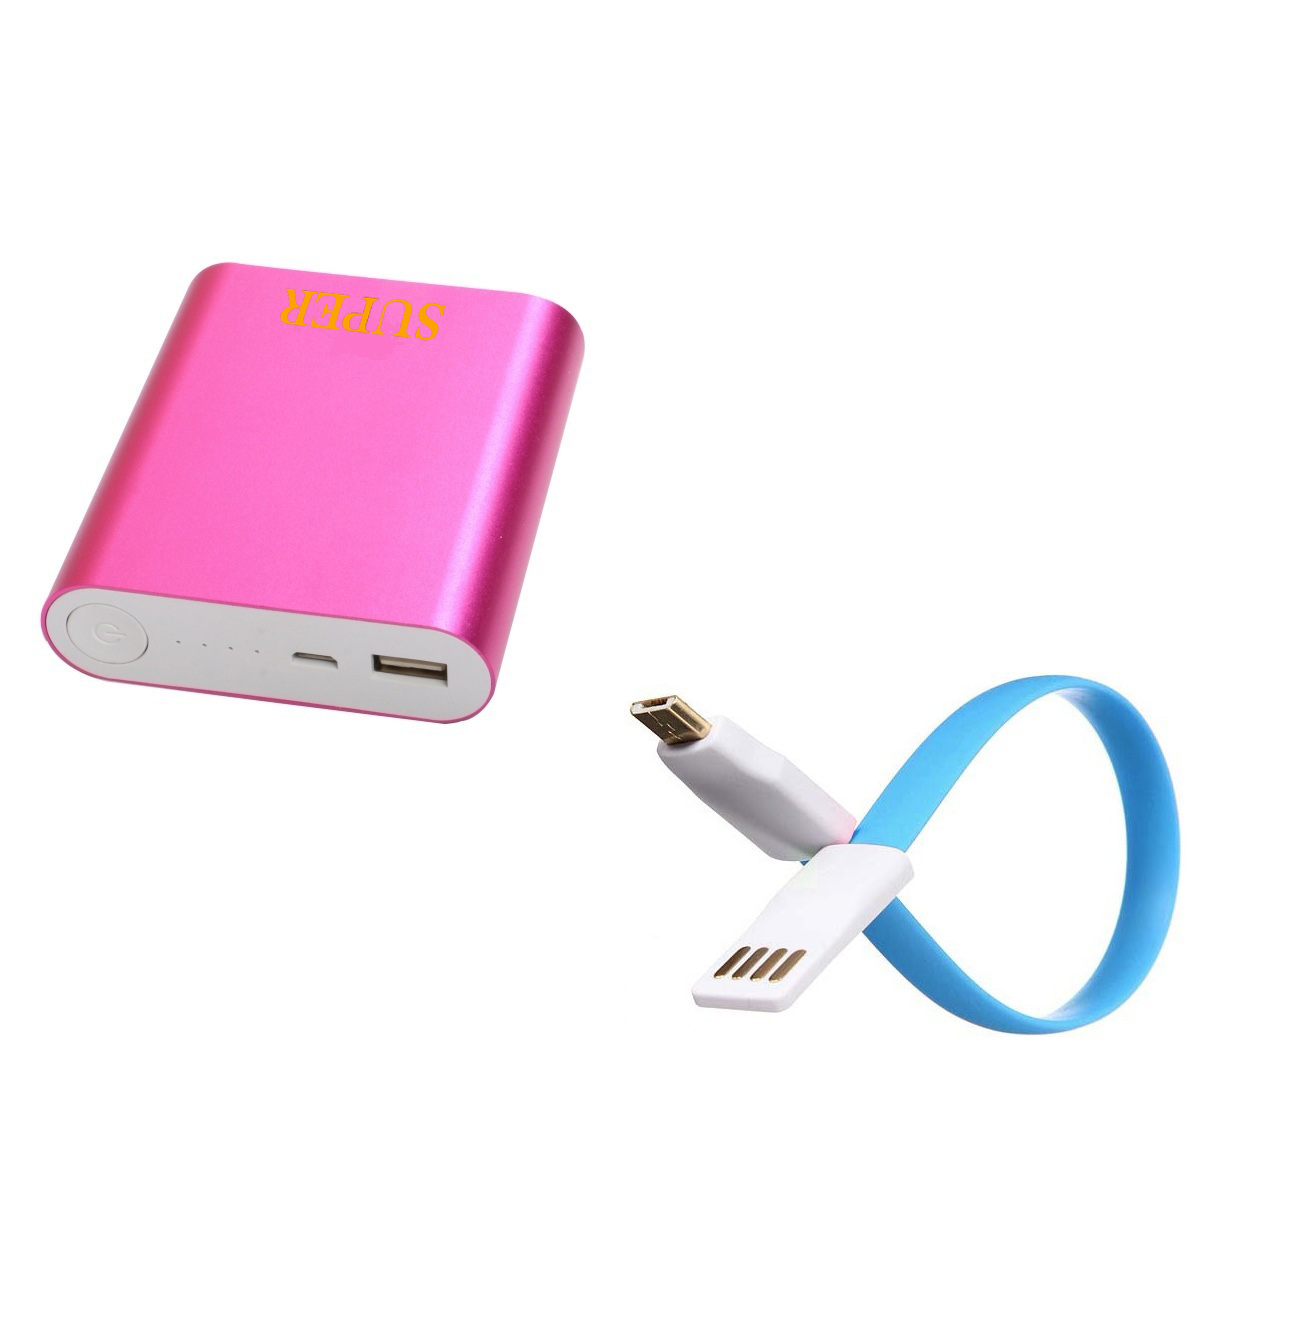 Super ultra portable battery charger 10400 mah power bank with 6 months manufacturer warranty